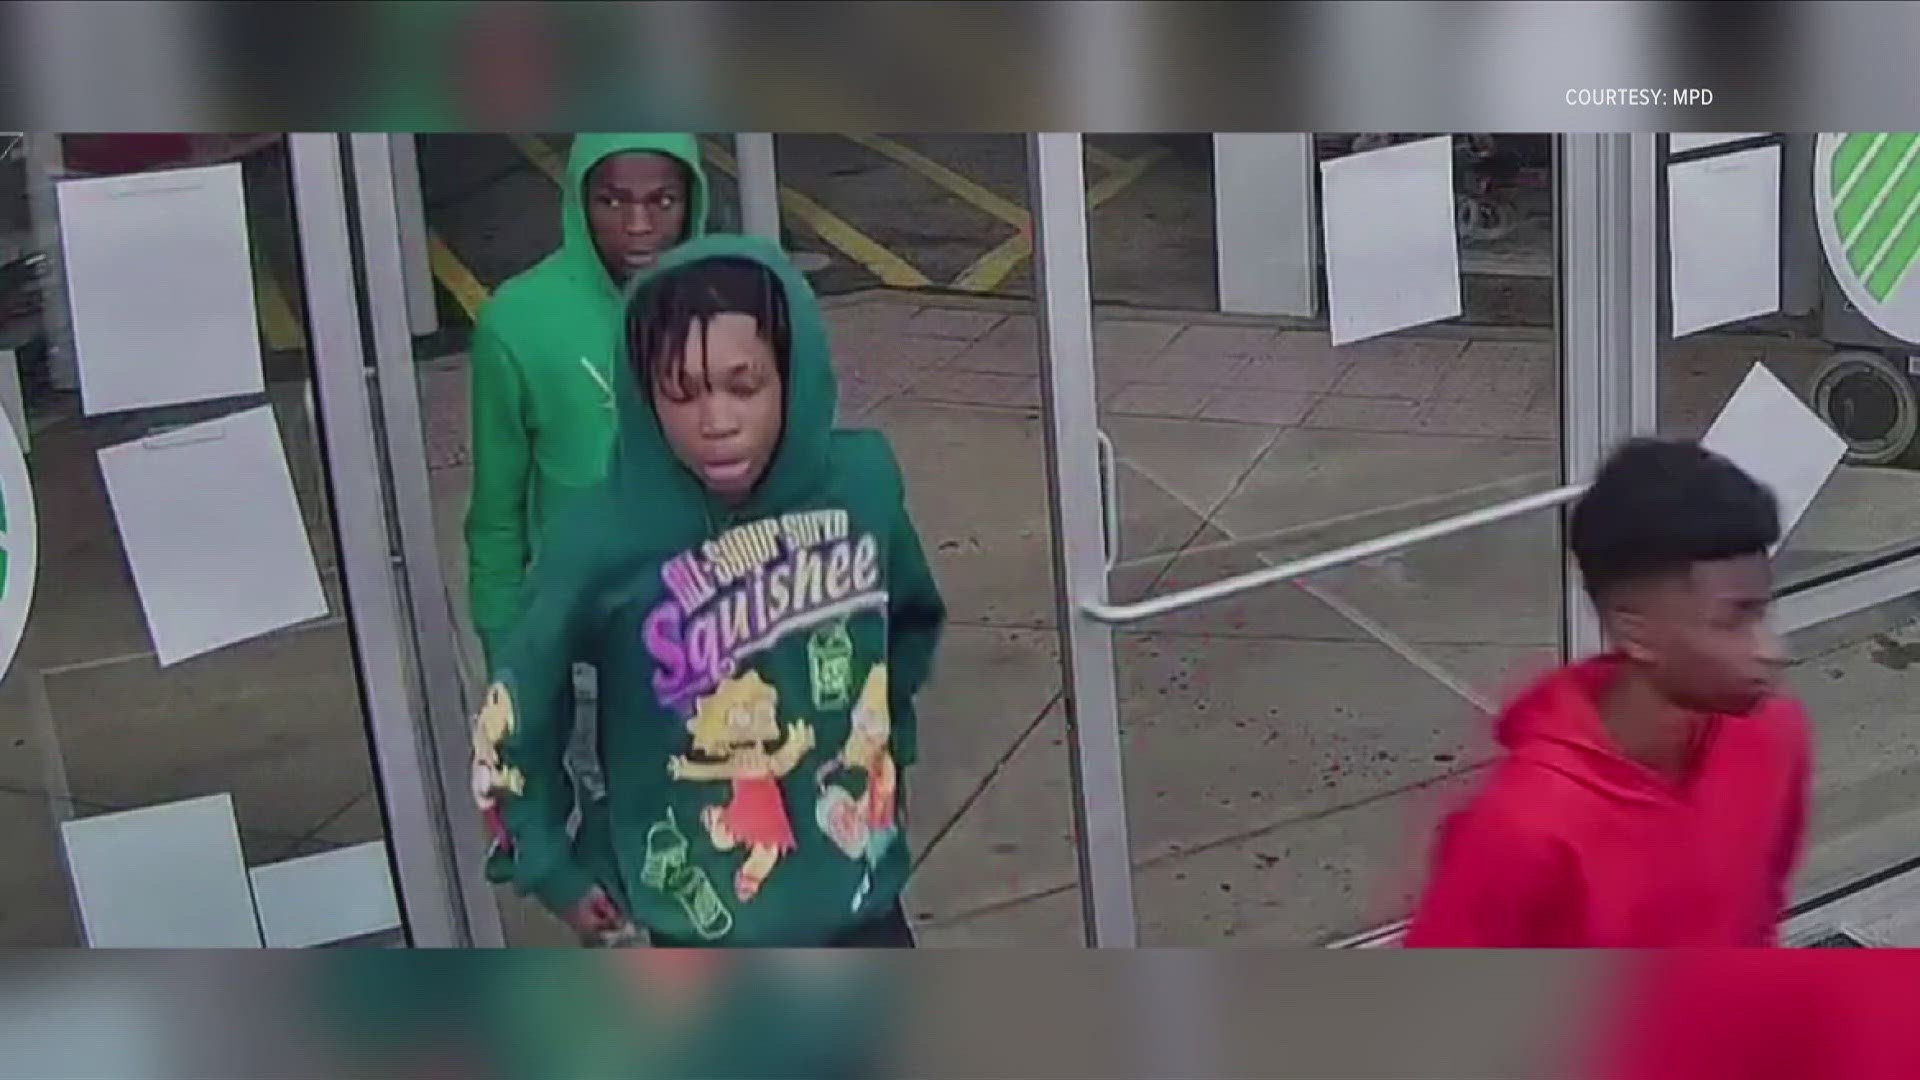 Memphis Police said they're still looking for the three teens who attempted multiple robberies at an East Memphis Dollar Tree on Christmas Eve.